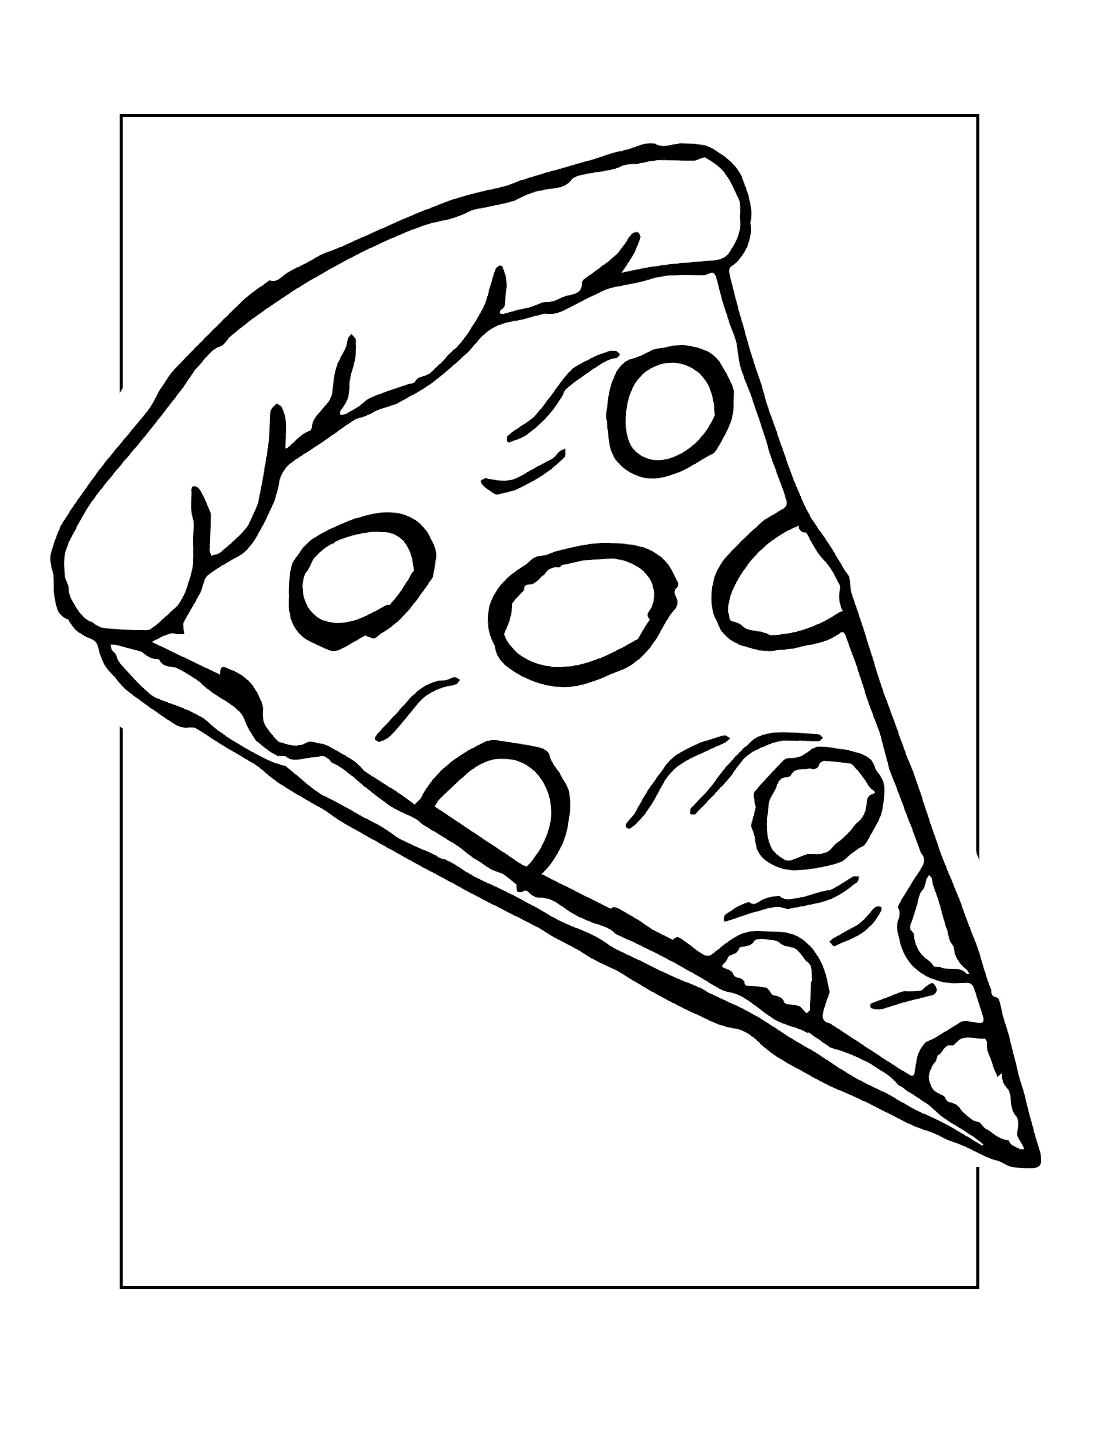 Pizza Slice Coloring Page